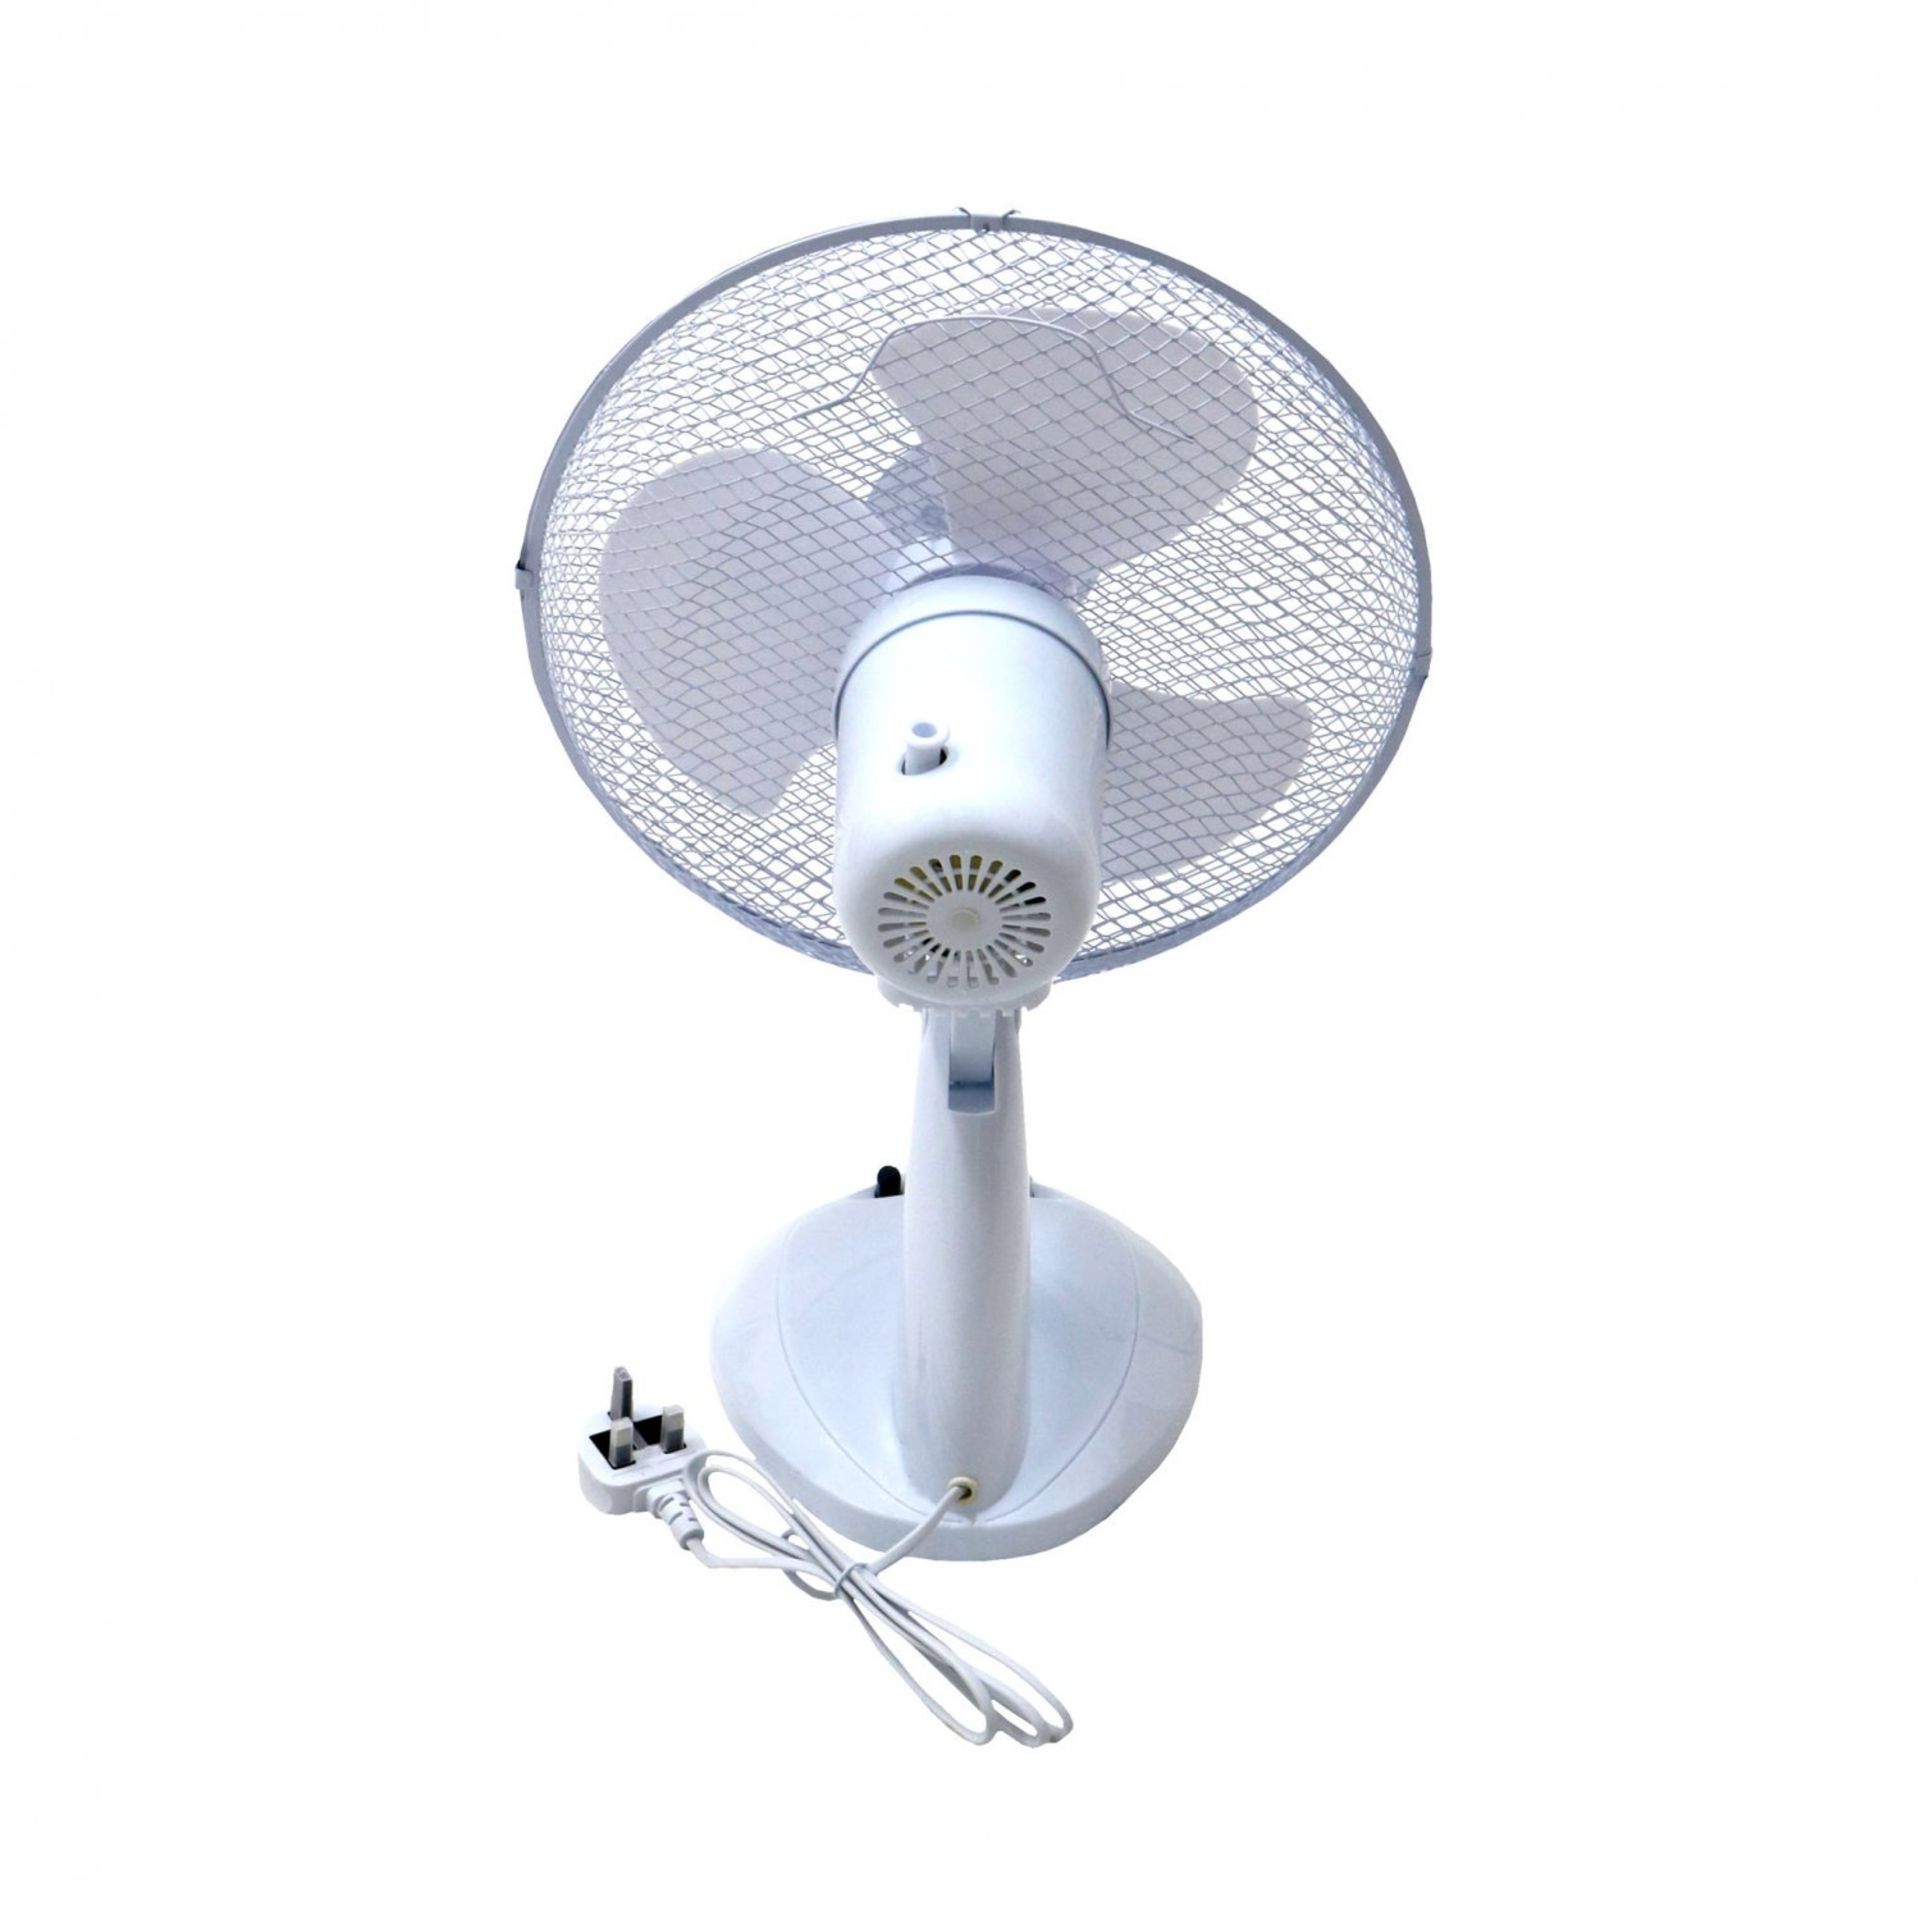 (RL123) 12" Oscillating White Desk Top Fan Stay cool this year with the 12" desk top ... - Image 2 of 2